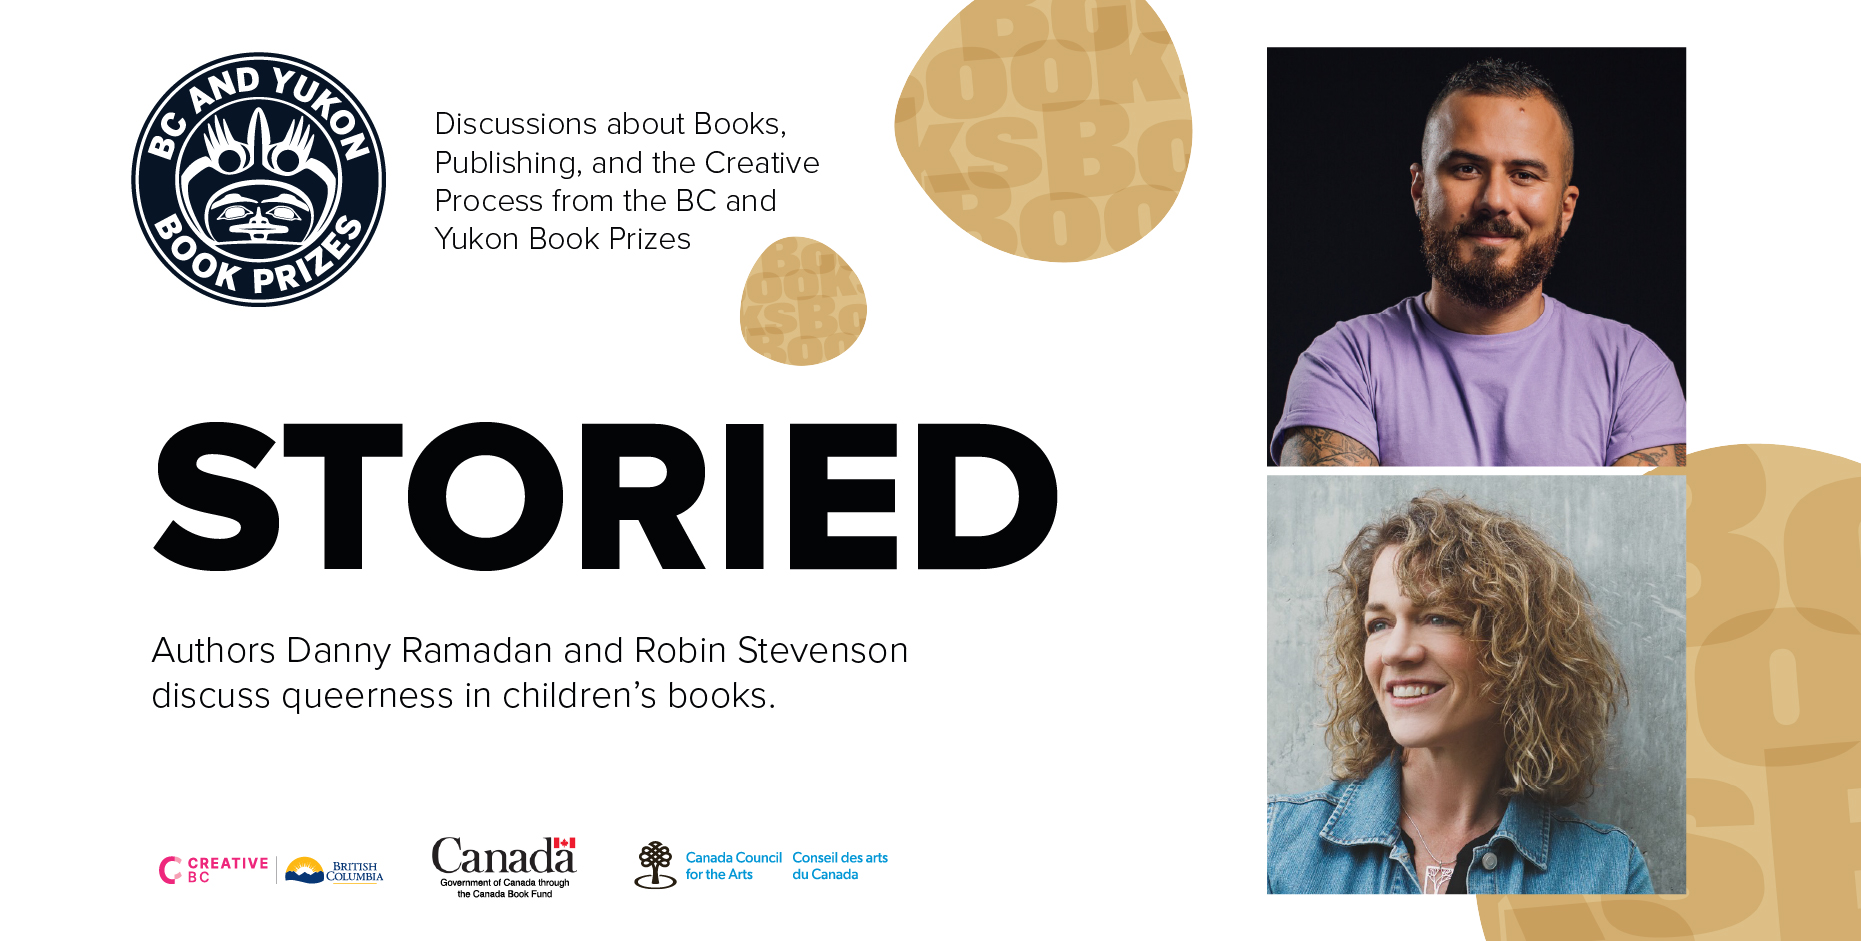 Storied: On queerness in children’s books with Danny Ramadan and Robin Stevenson